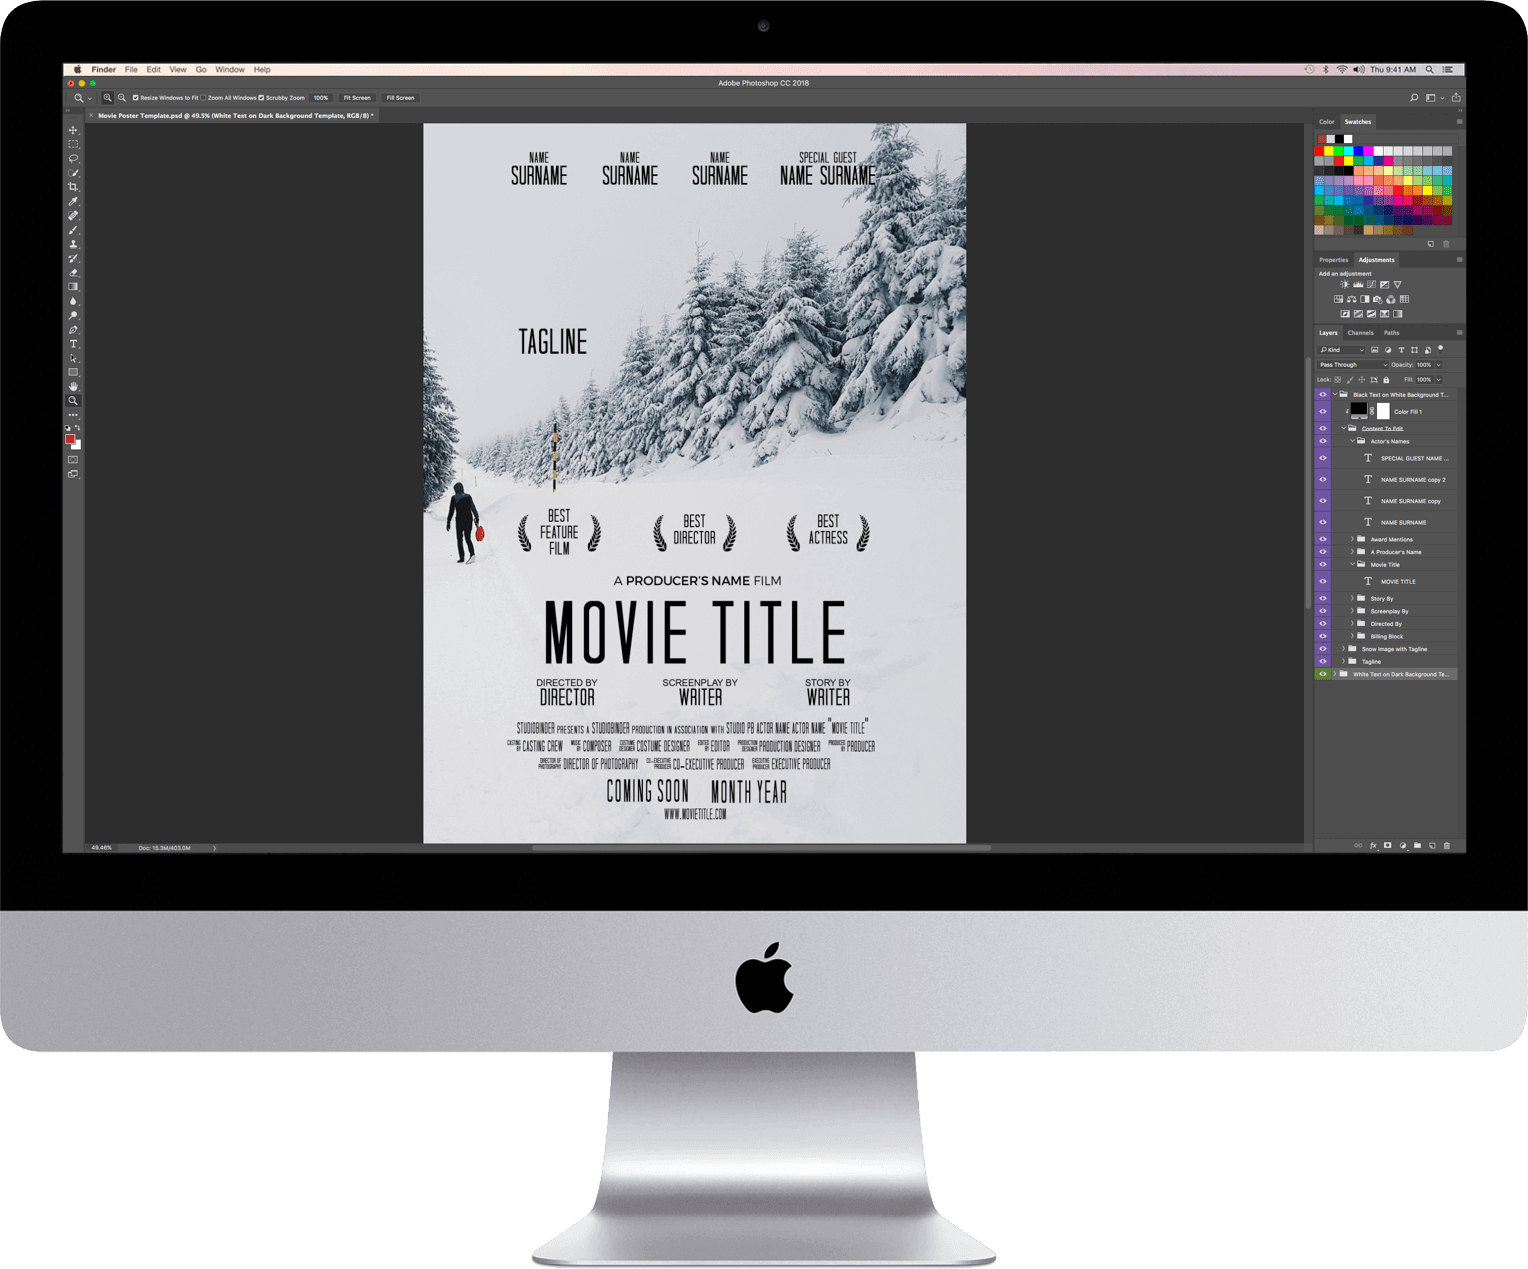 download-your-free-movie-poster-template-for-photoshop-studiobinder